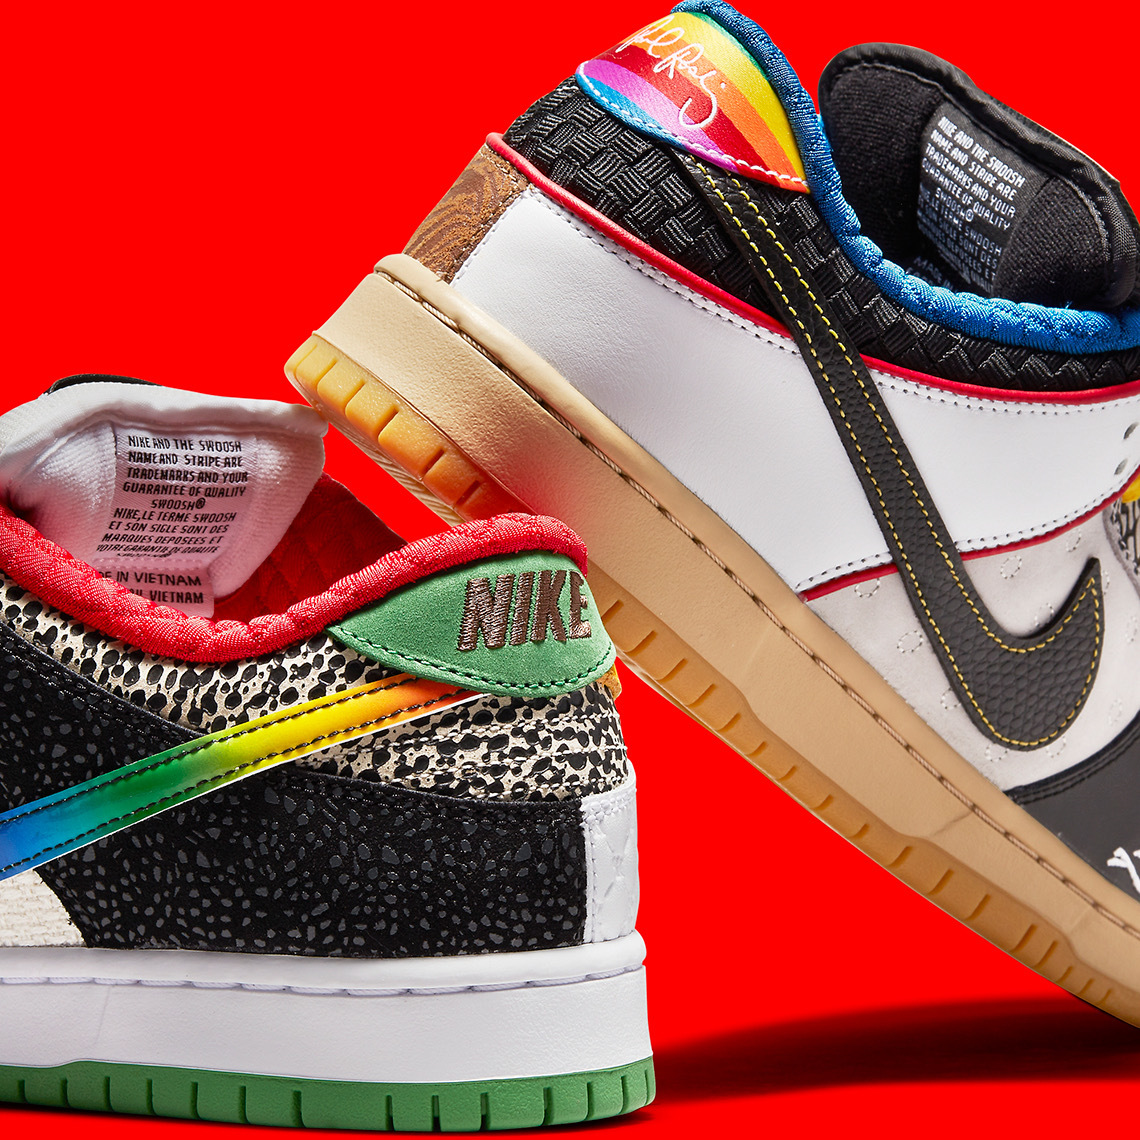 Nike SB Mingled All of Paul Rodriguez’s Best Sneakers Into One